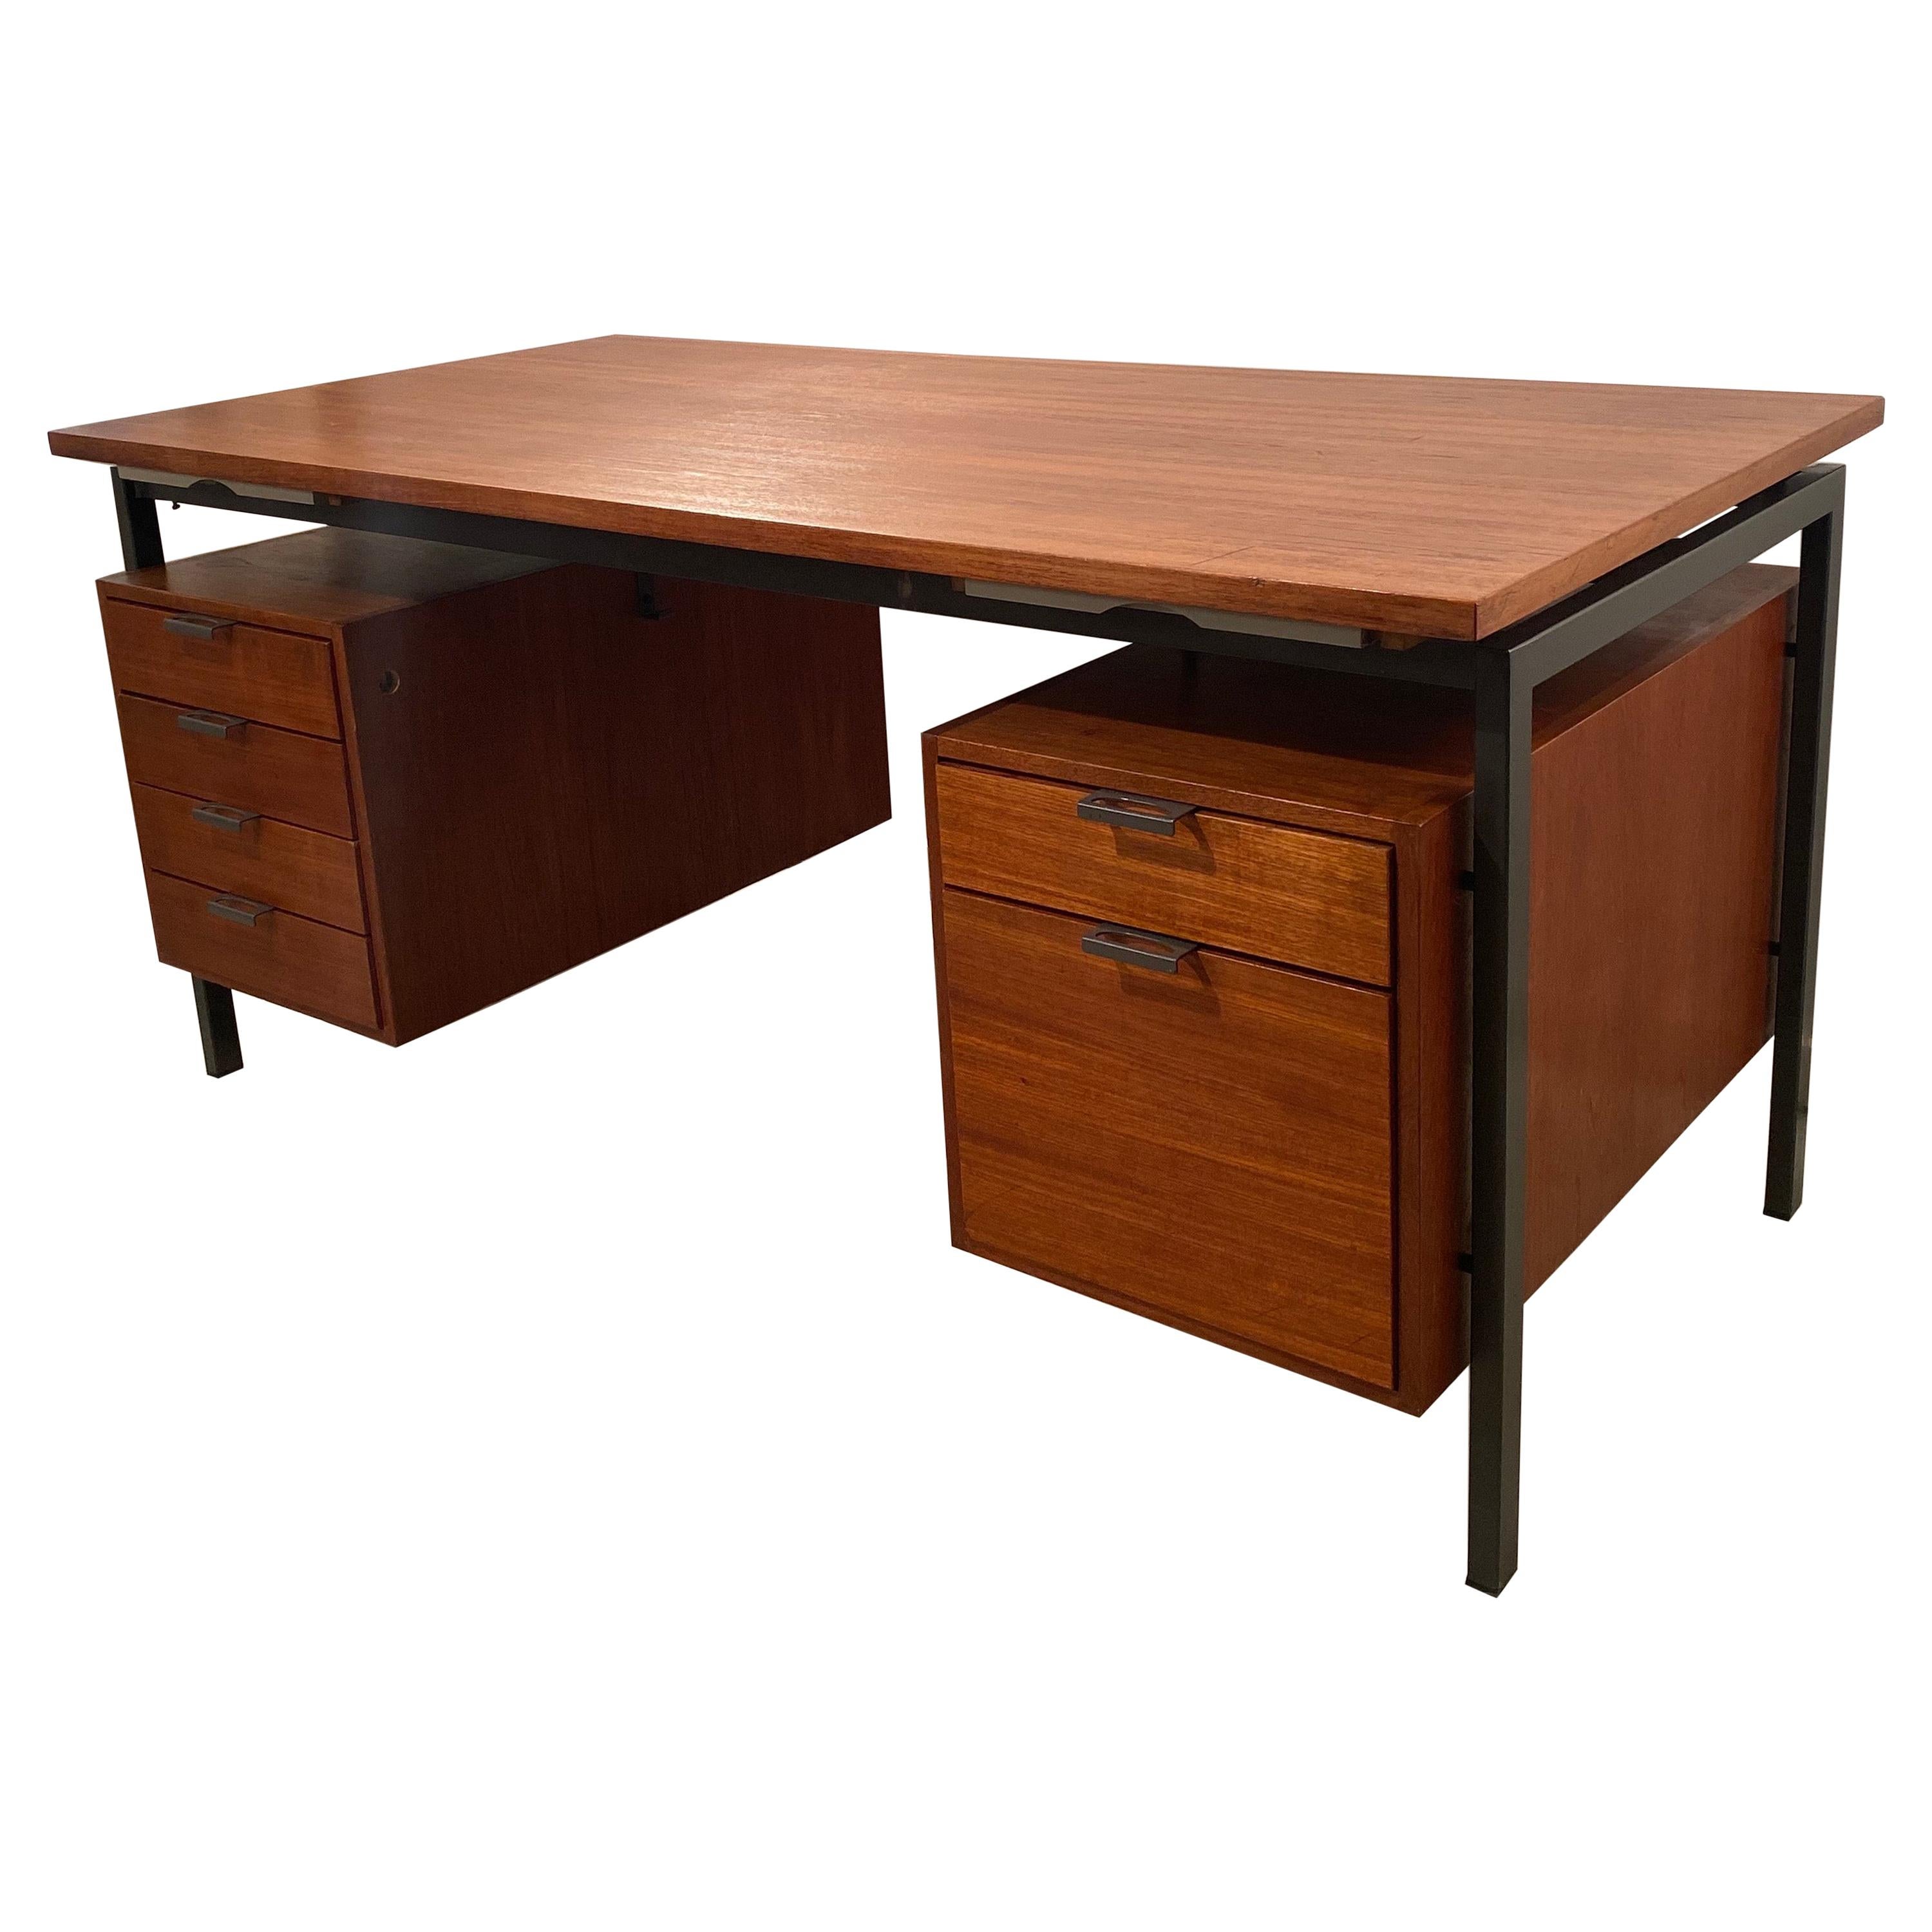 Bauhaus Desks And Writing Tables 23 For Sale At 1stdibs